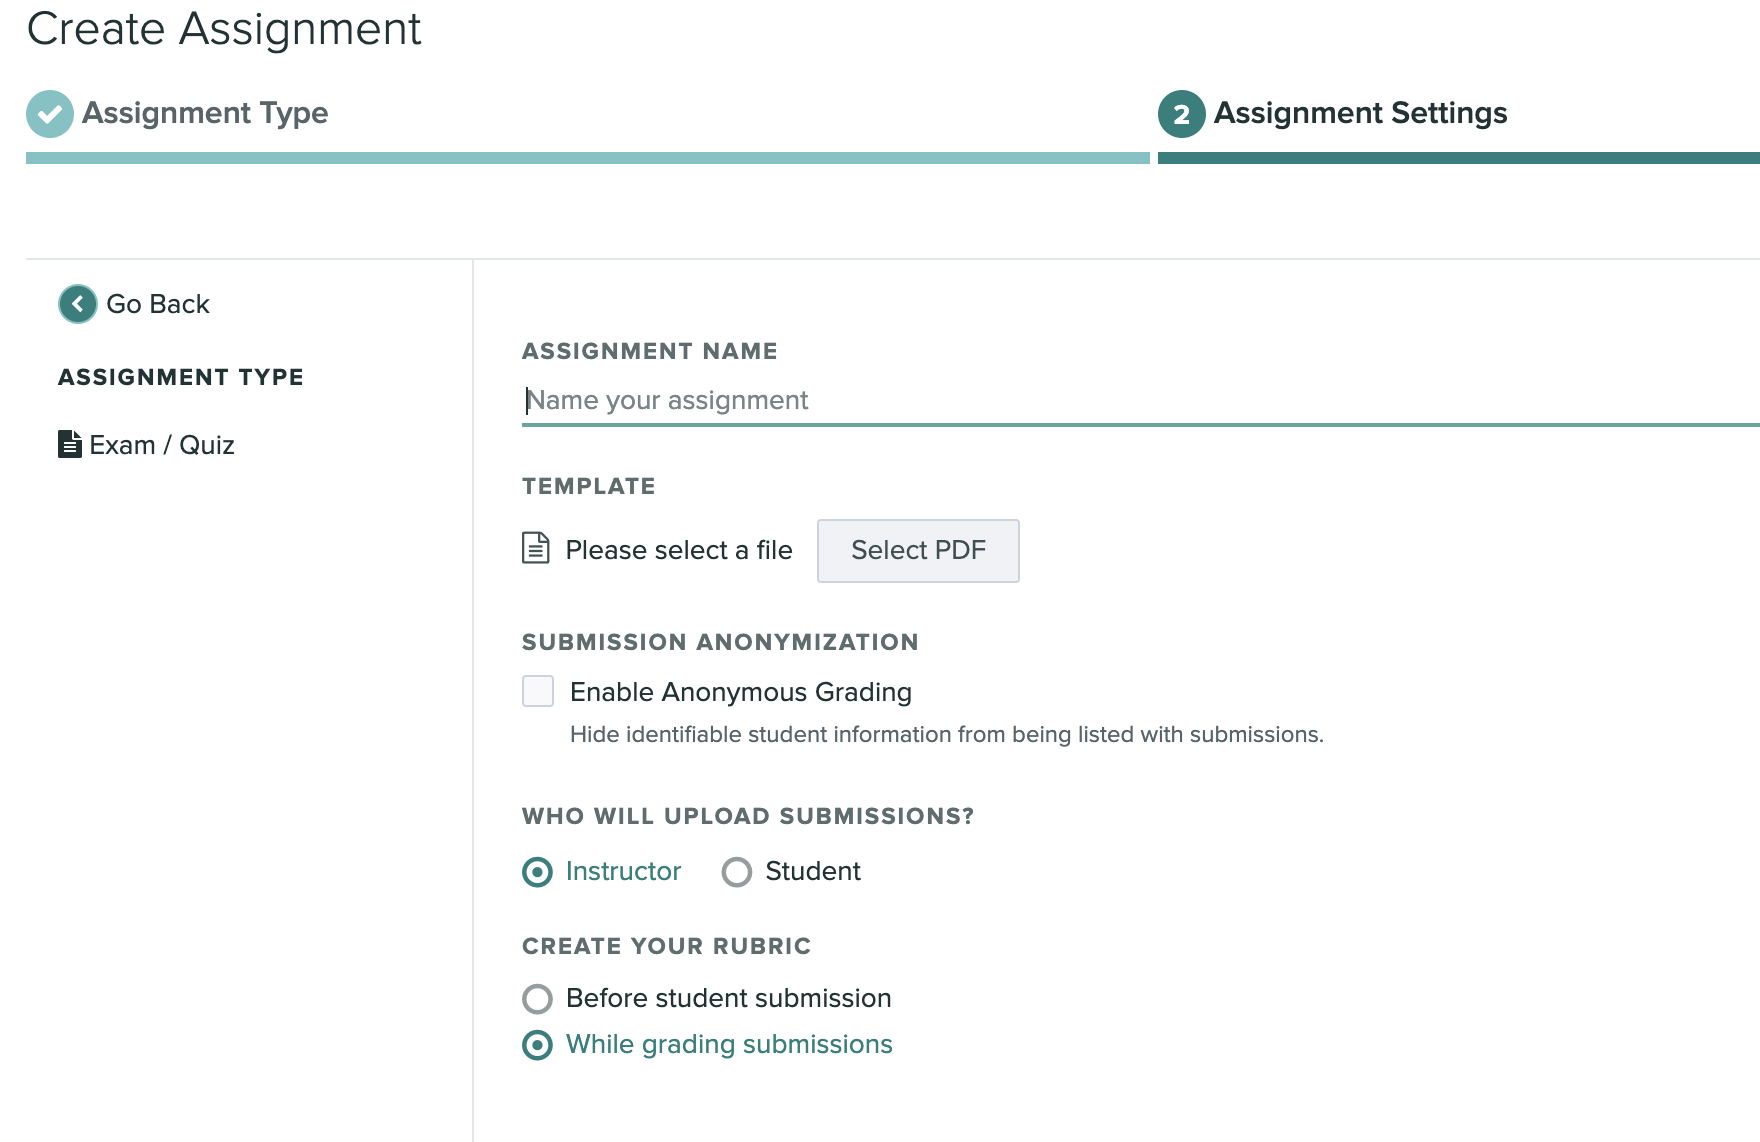 A screen capture of the Exam/Quiz assignment type settings page in the Create Assignment workflow.